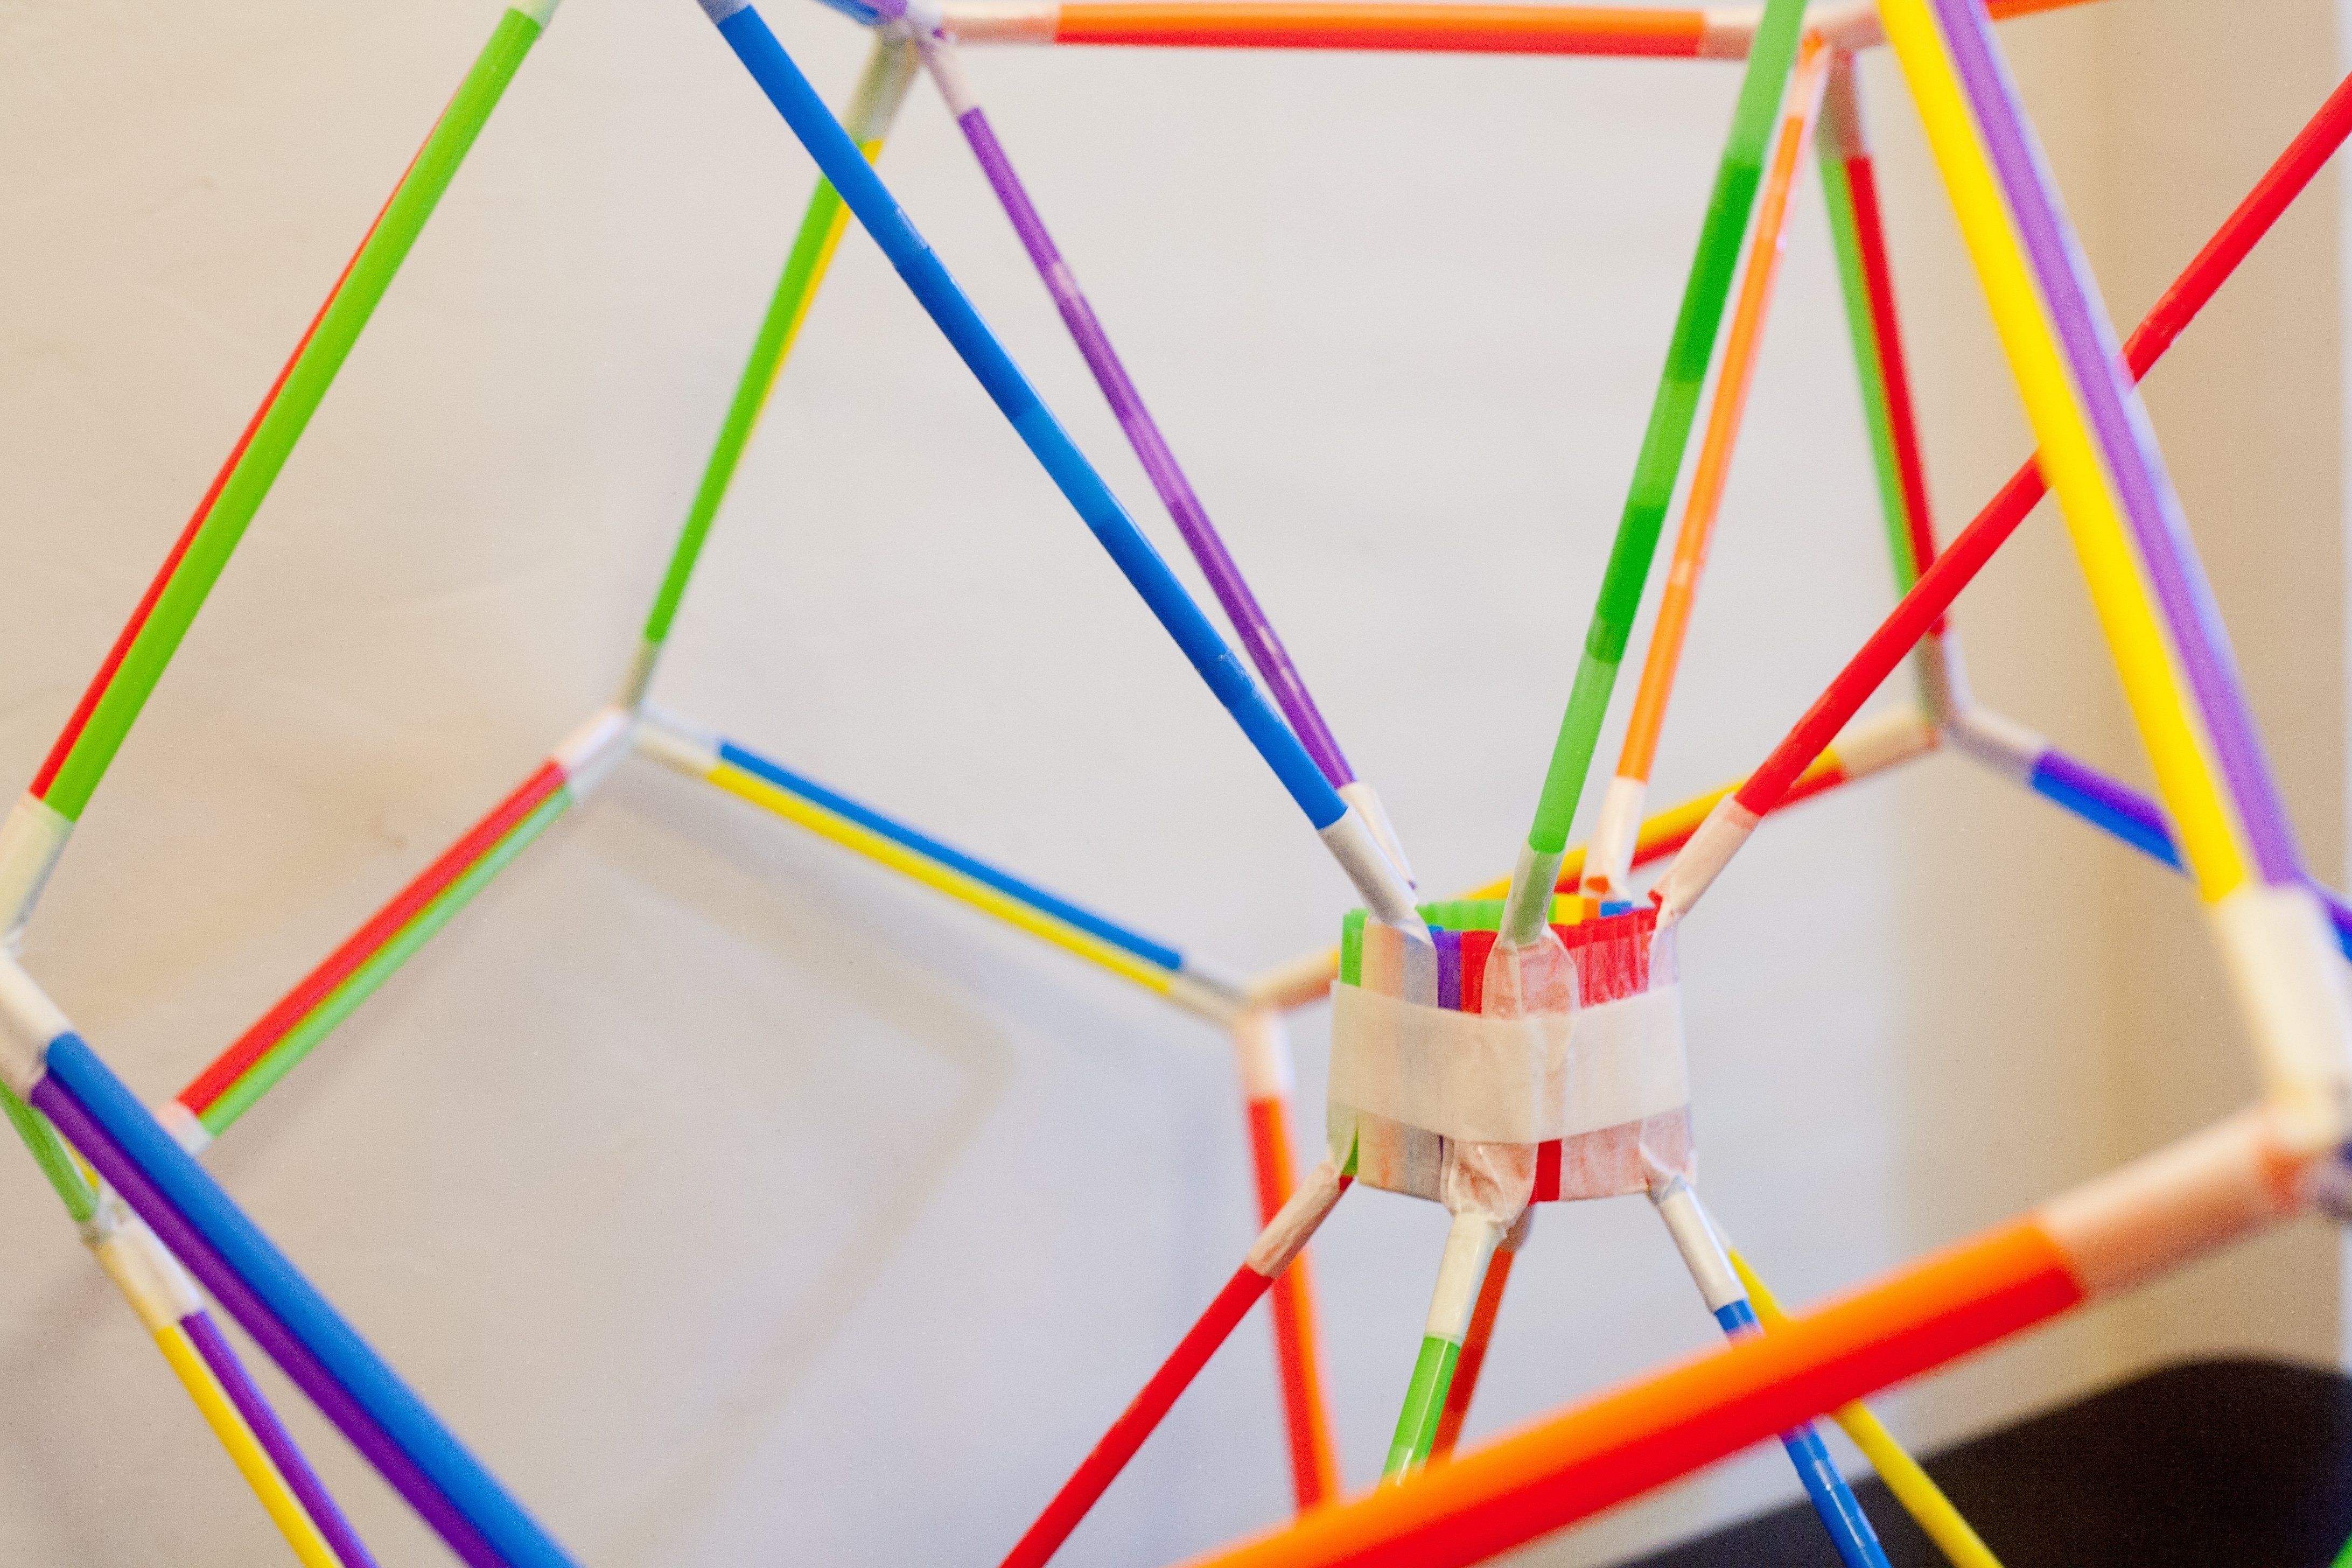 egg drop project ideas with straws